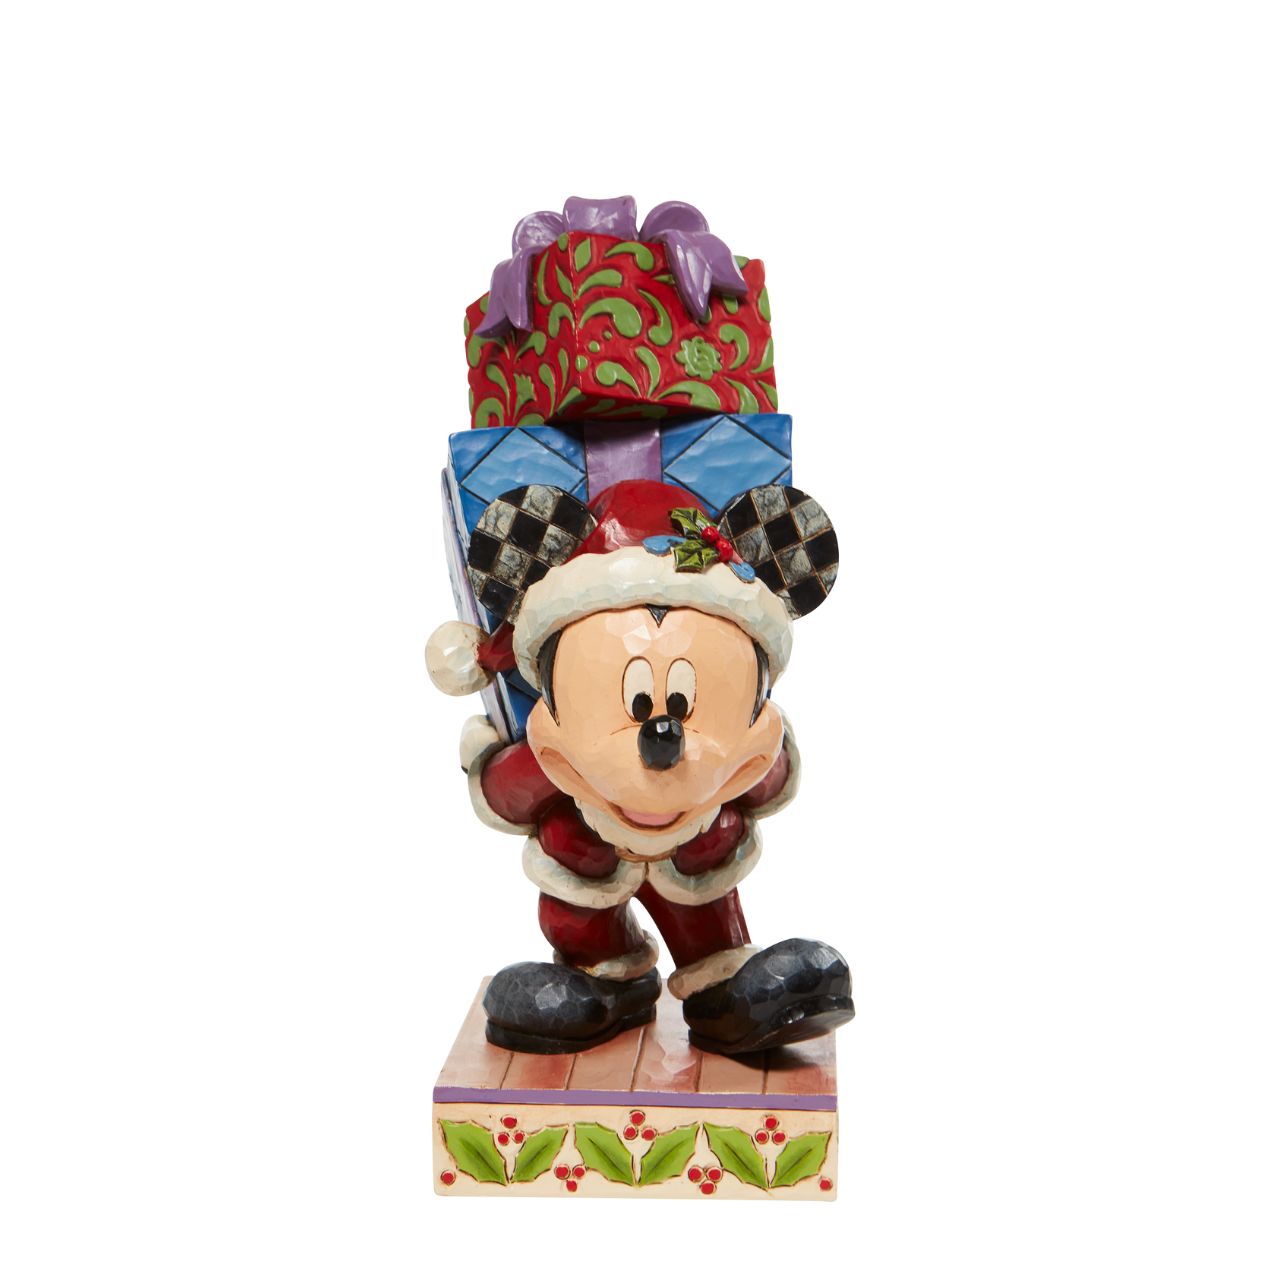 Jim Shore Here Comes Old St. Mick - Disney Mickey Carrying Gifts Figurine  There is a creature stirring in the house - and it's a mouse Dressed as Santa Claus and carrying a stack of presents, Mickey delivers holiday cheer and jolly jingles wherever he goes. 